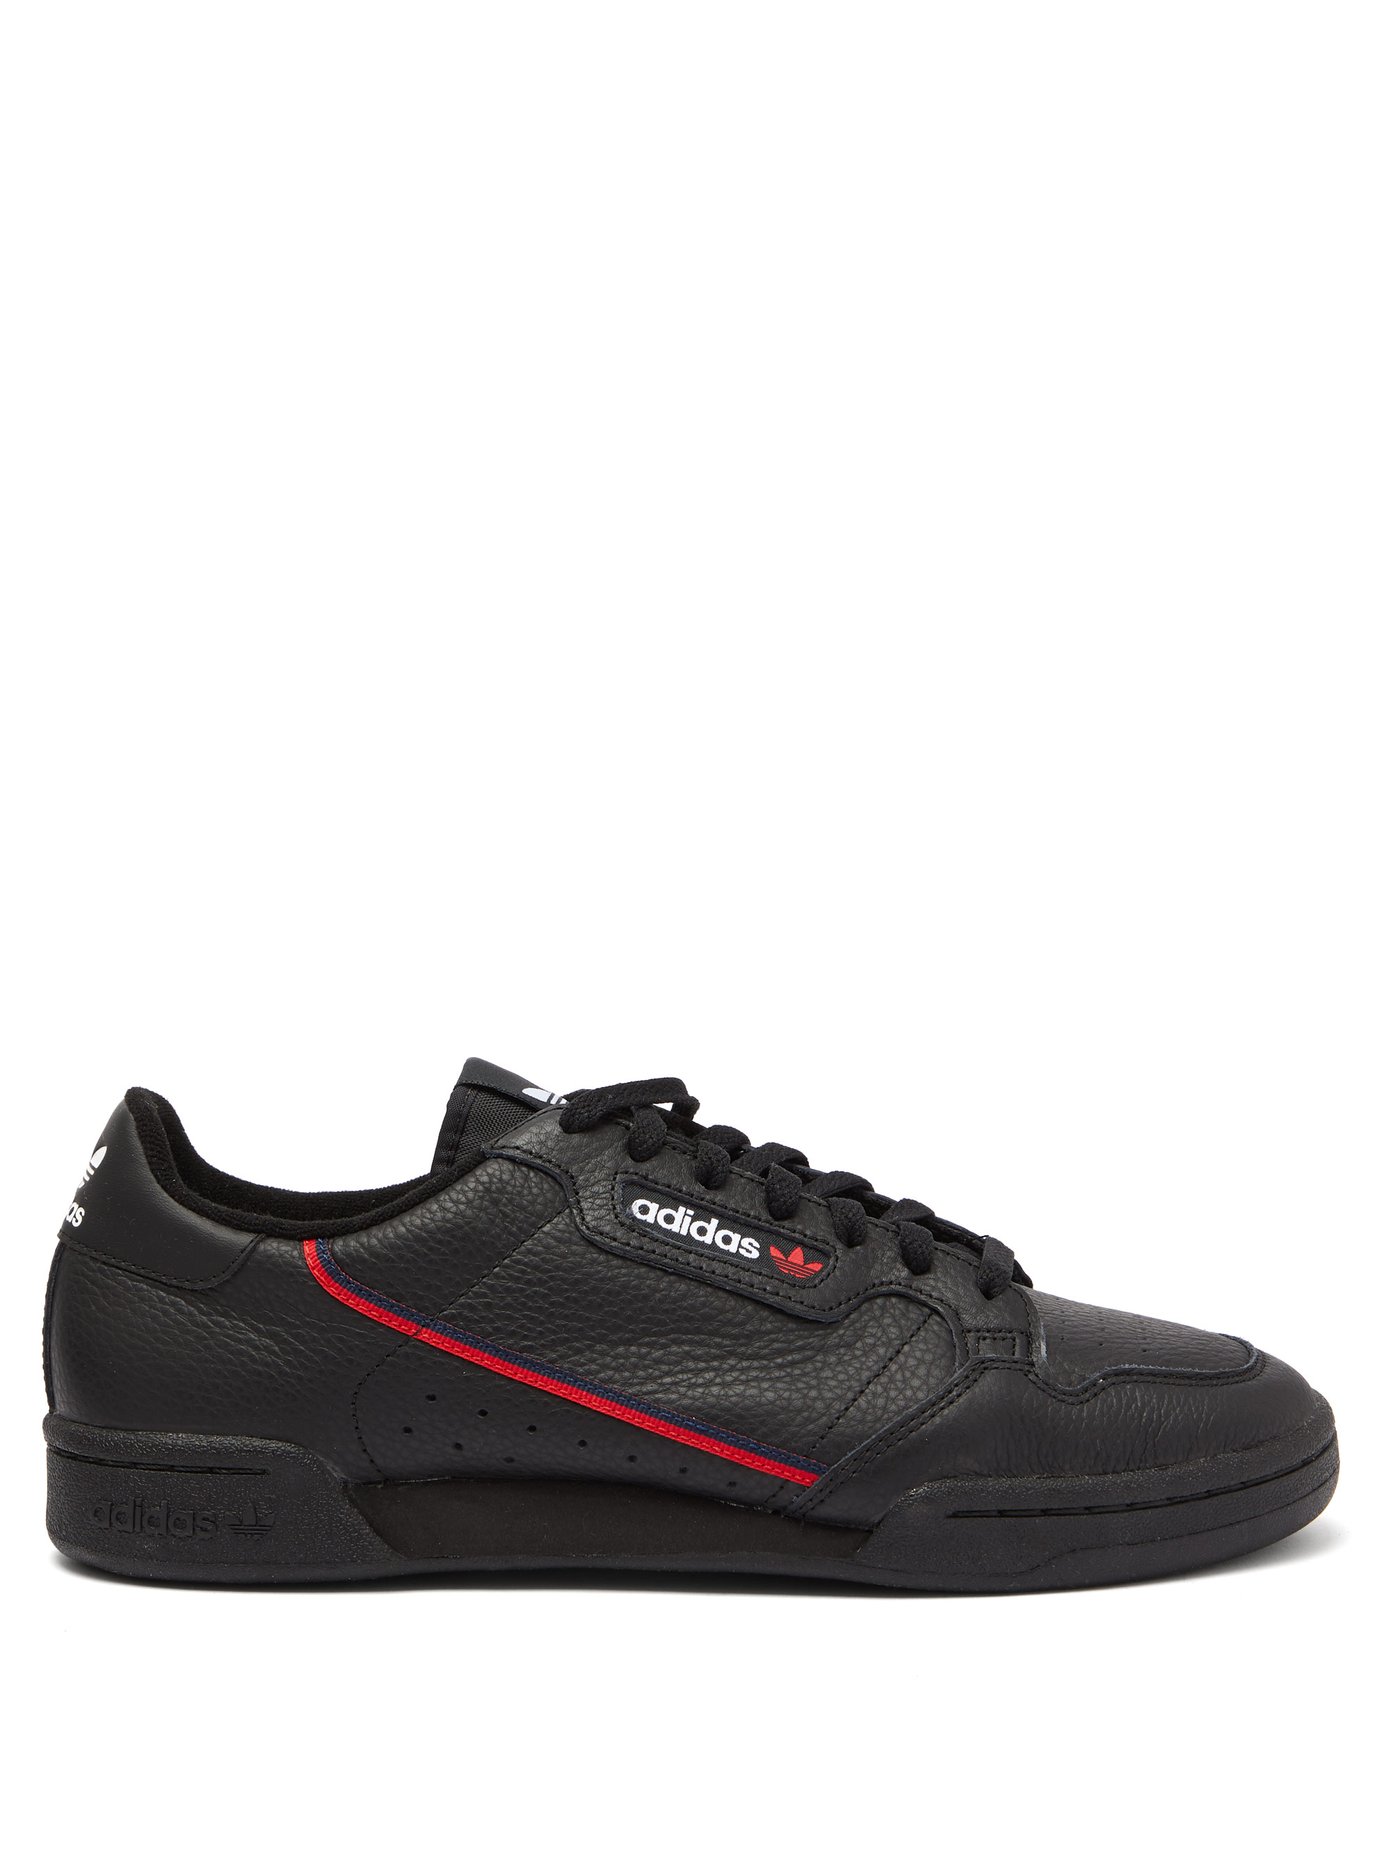 adidas continental 80 leather